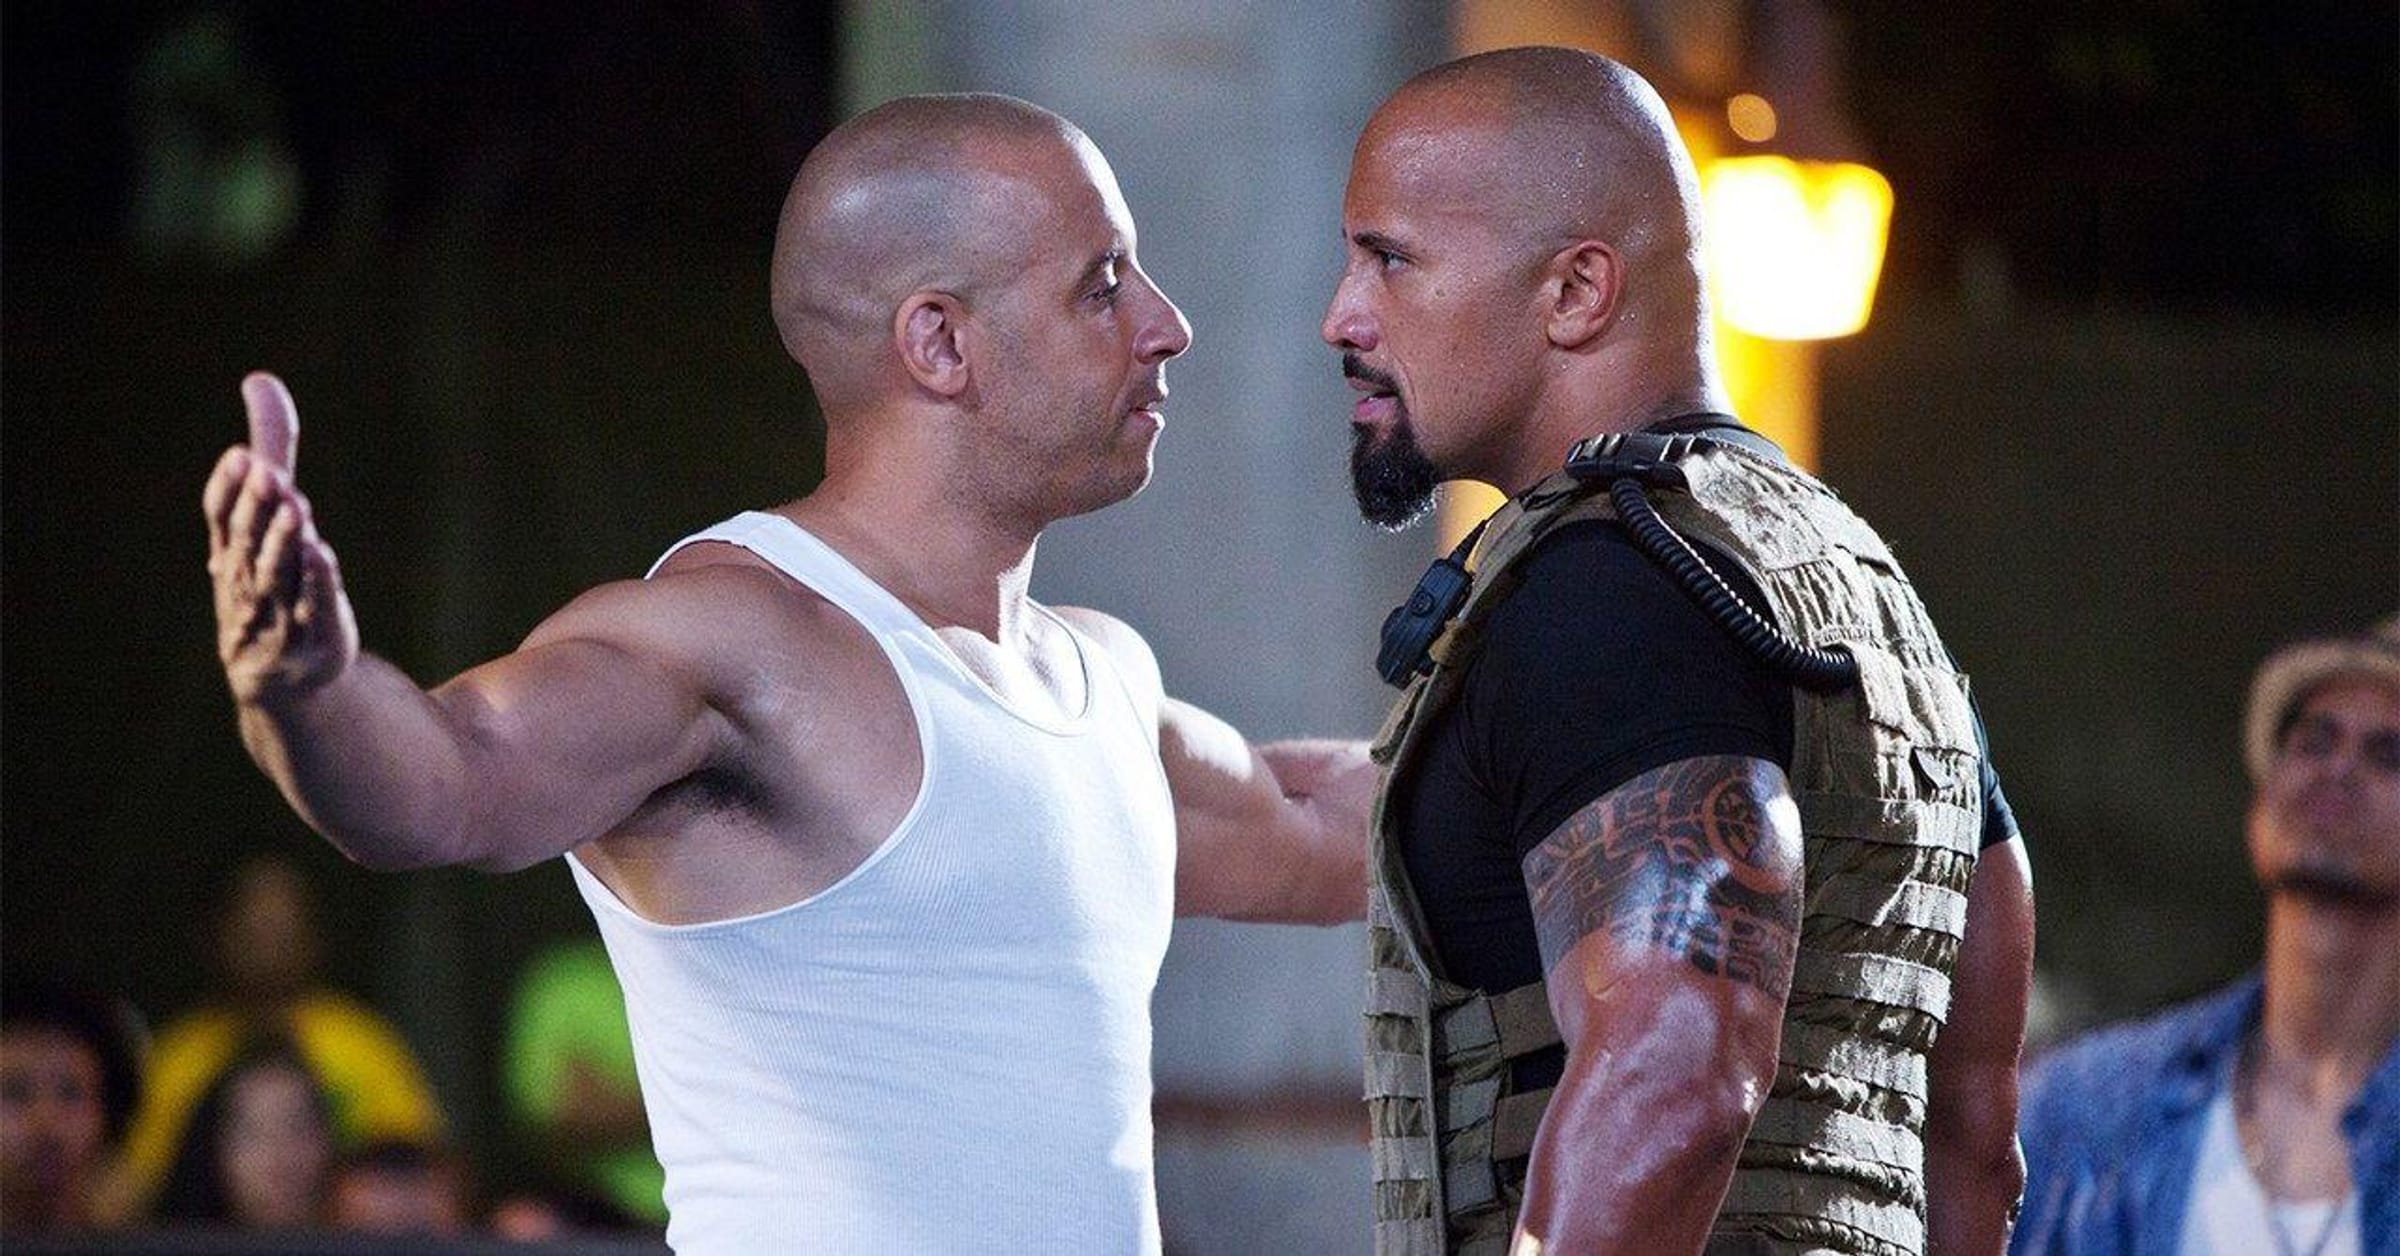 Dwayne The Rock Johnson Has Been In 40 Movies – How Many Have You Seen?